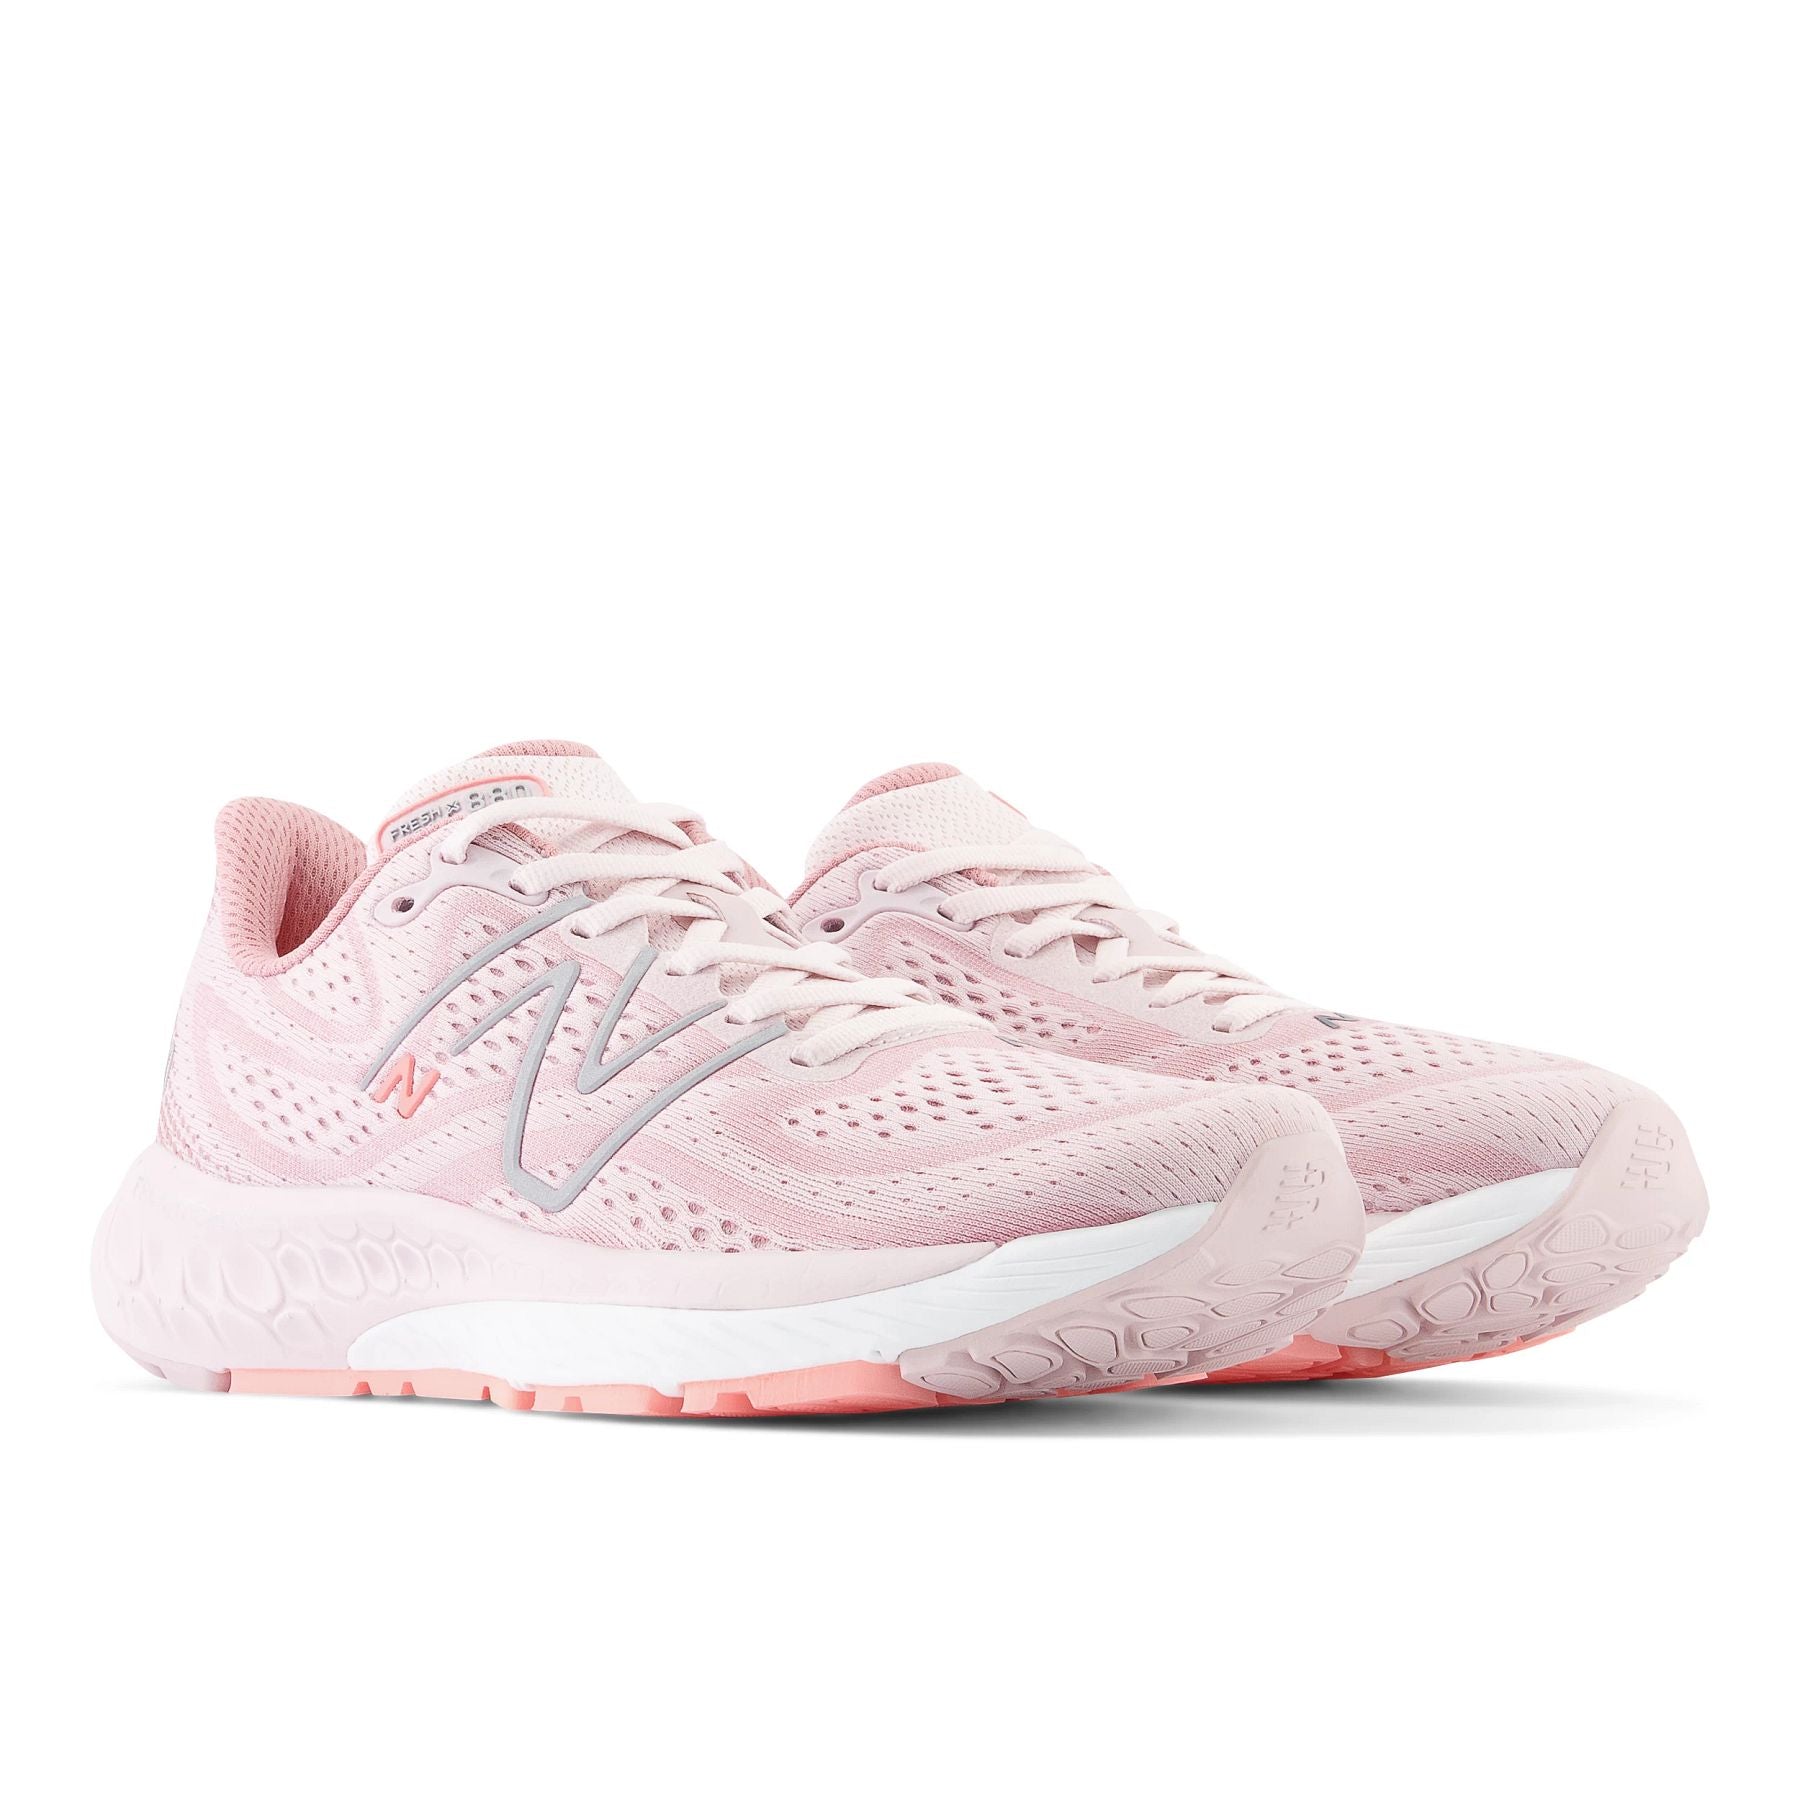 Front angle view of the Women's 880 V13 by New Balance in the color Stone/Pink